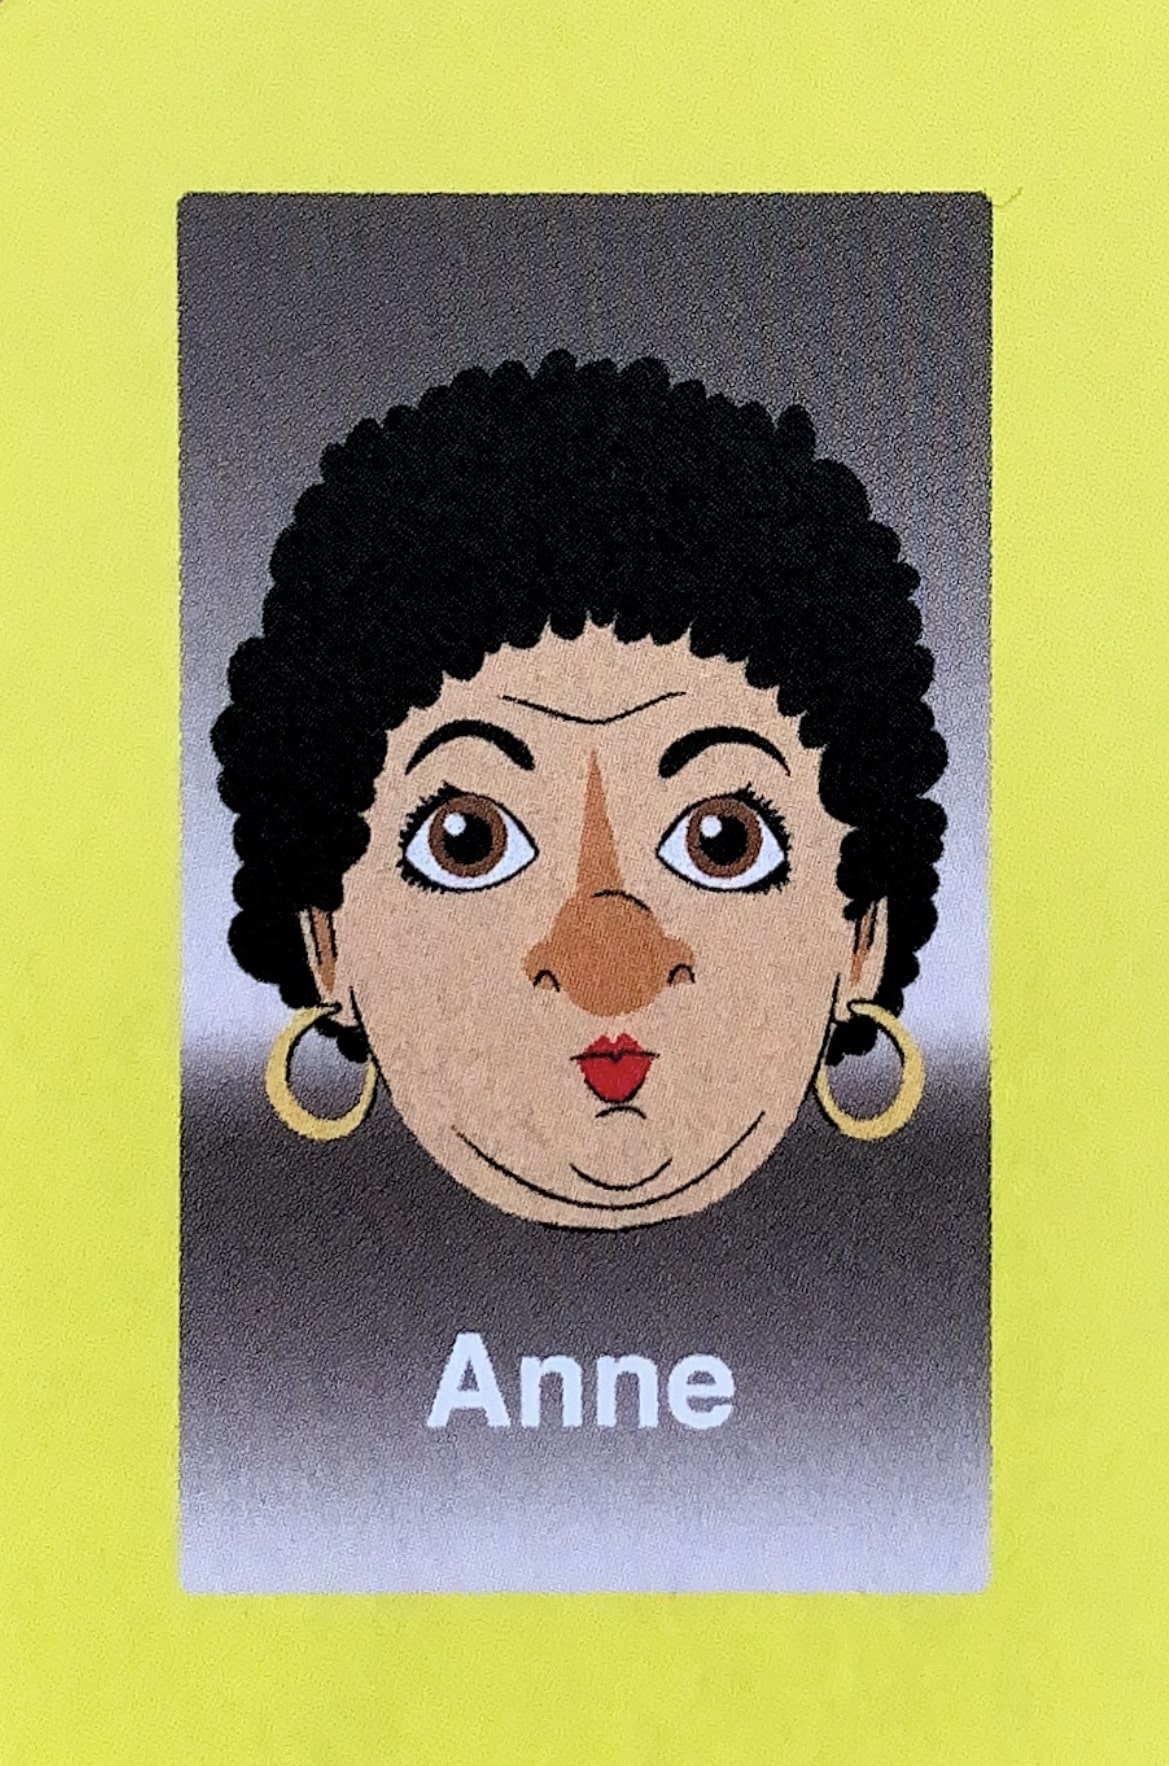  - Anne was in the midst of her final year at NYU when she found out she would be a face in Guess Who?®. At the time she was pre-med, applying to medical school with the hope of beginning the subsequent fall. She decided to take a few weeks off to go on the Guess Who?® promotional tour with the other faces, and to have a little bit of fun with her recently filled bank account. Five years later, she finally returned to NYU to finish her degree. During this extended break, she realized she was meant to be in front of an audience, and so transitioned into their theater program, graduating a couple of years later. She went on to a successful career off-Broadway, and is still a workingactress in New York.